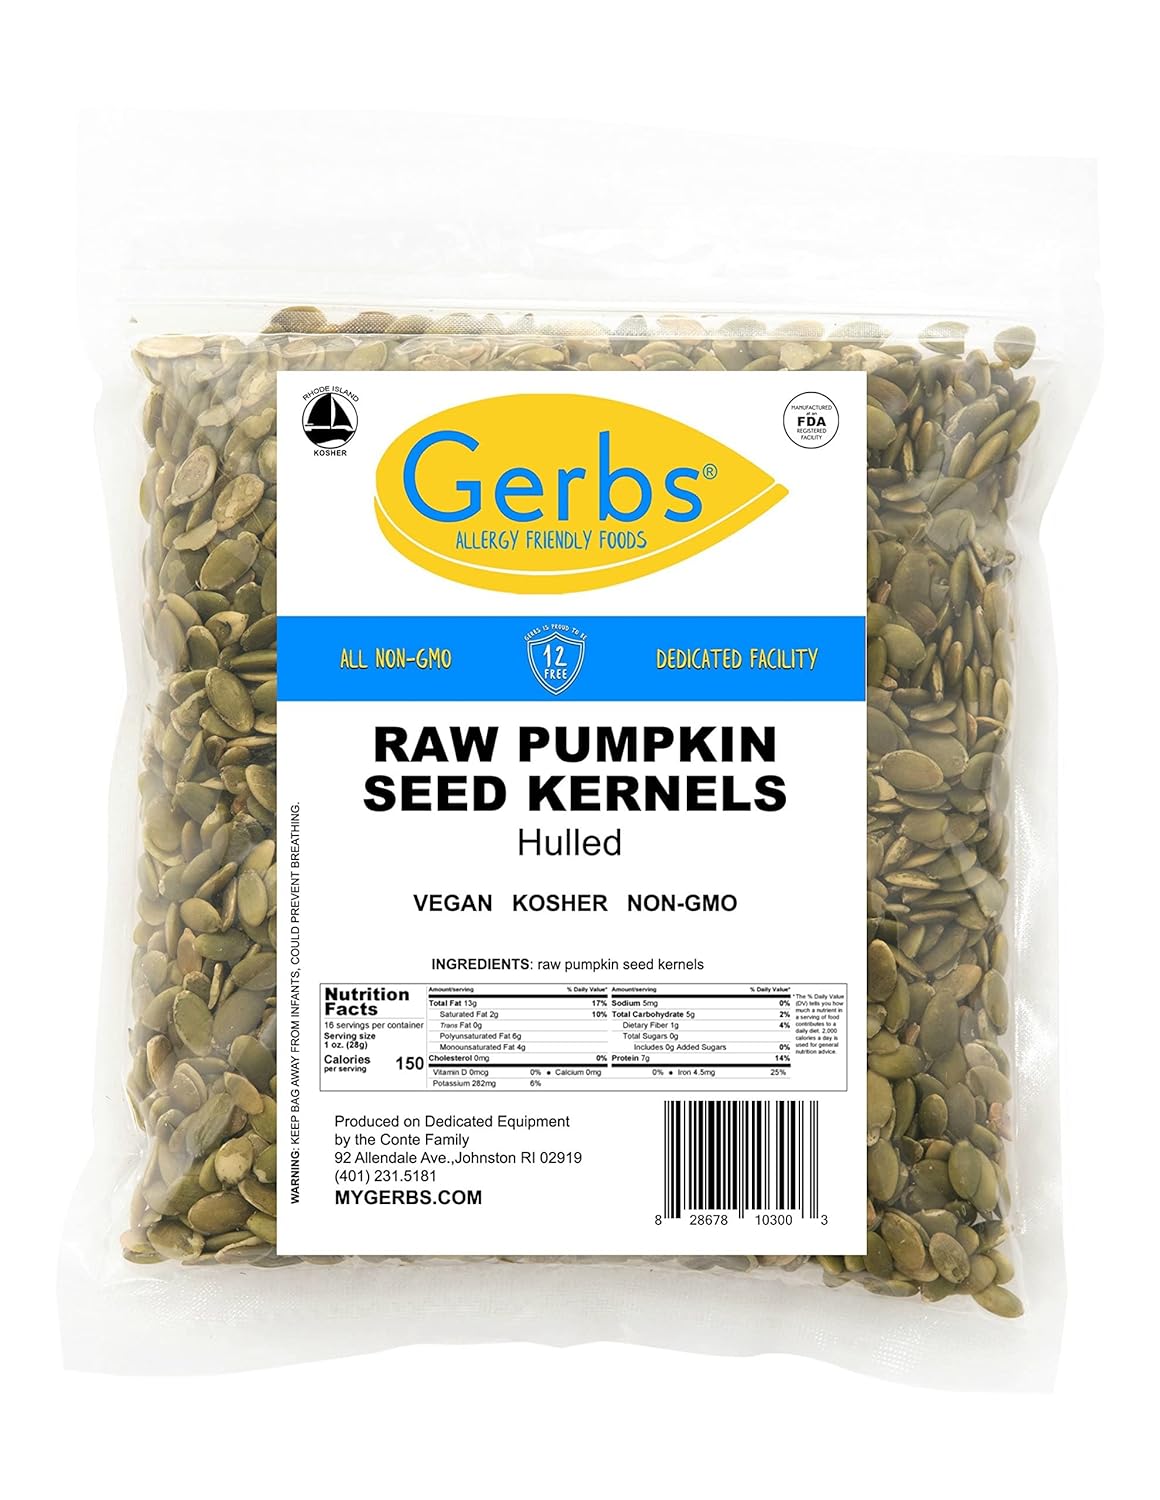 GERBS Raw Pumpkin Seed Kernels 1 LB | Top 14 Allergy Free Food | Protein rich super snack food | Use in salads, yogurt, baking, oatmeal, trail mix | Grown in Canada, packaged in USA | Vegan, Kosher